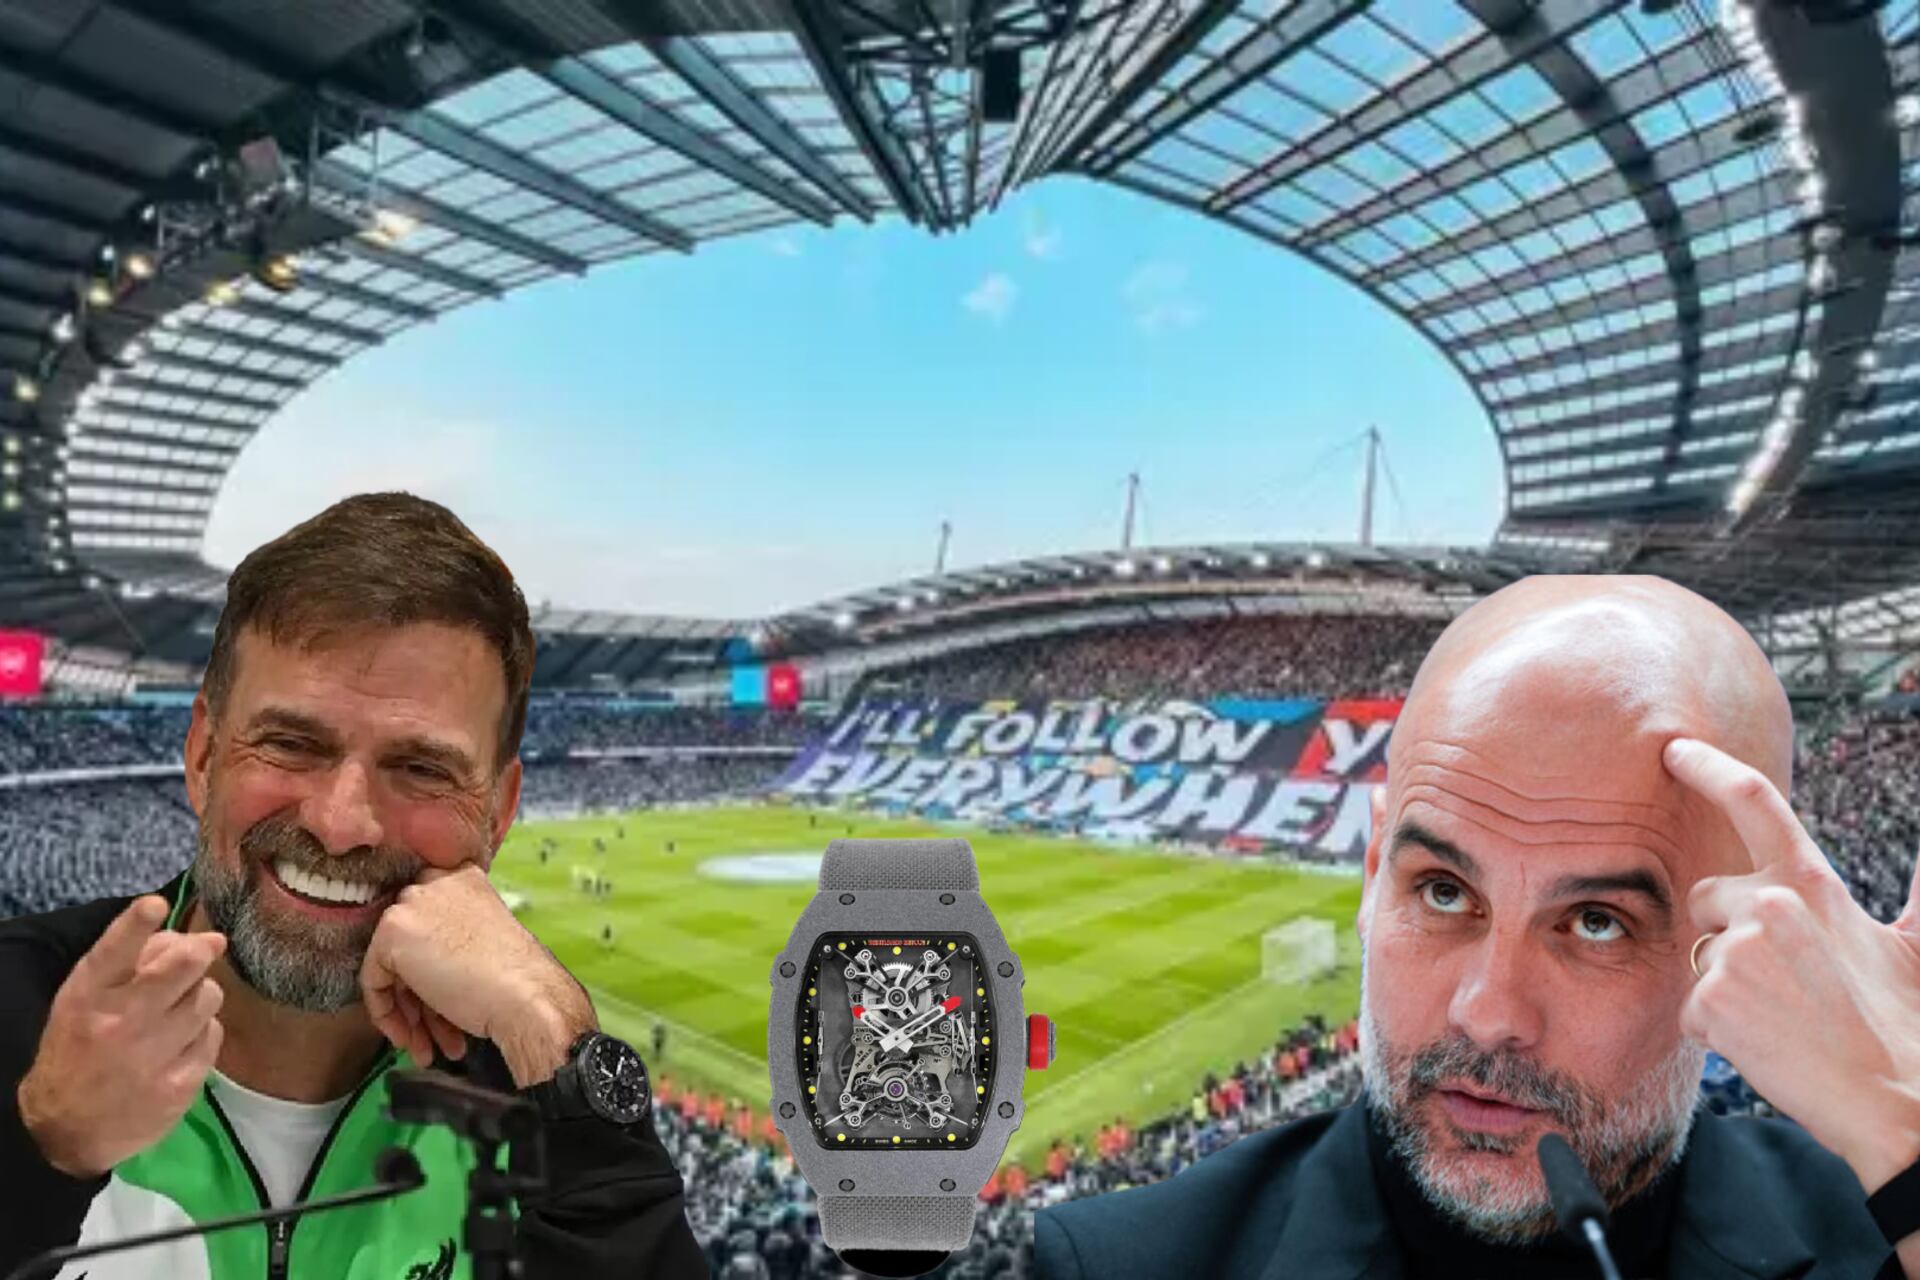 As Klopp has a 43k watch, Guardiola's luxurious watch is worth this much